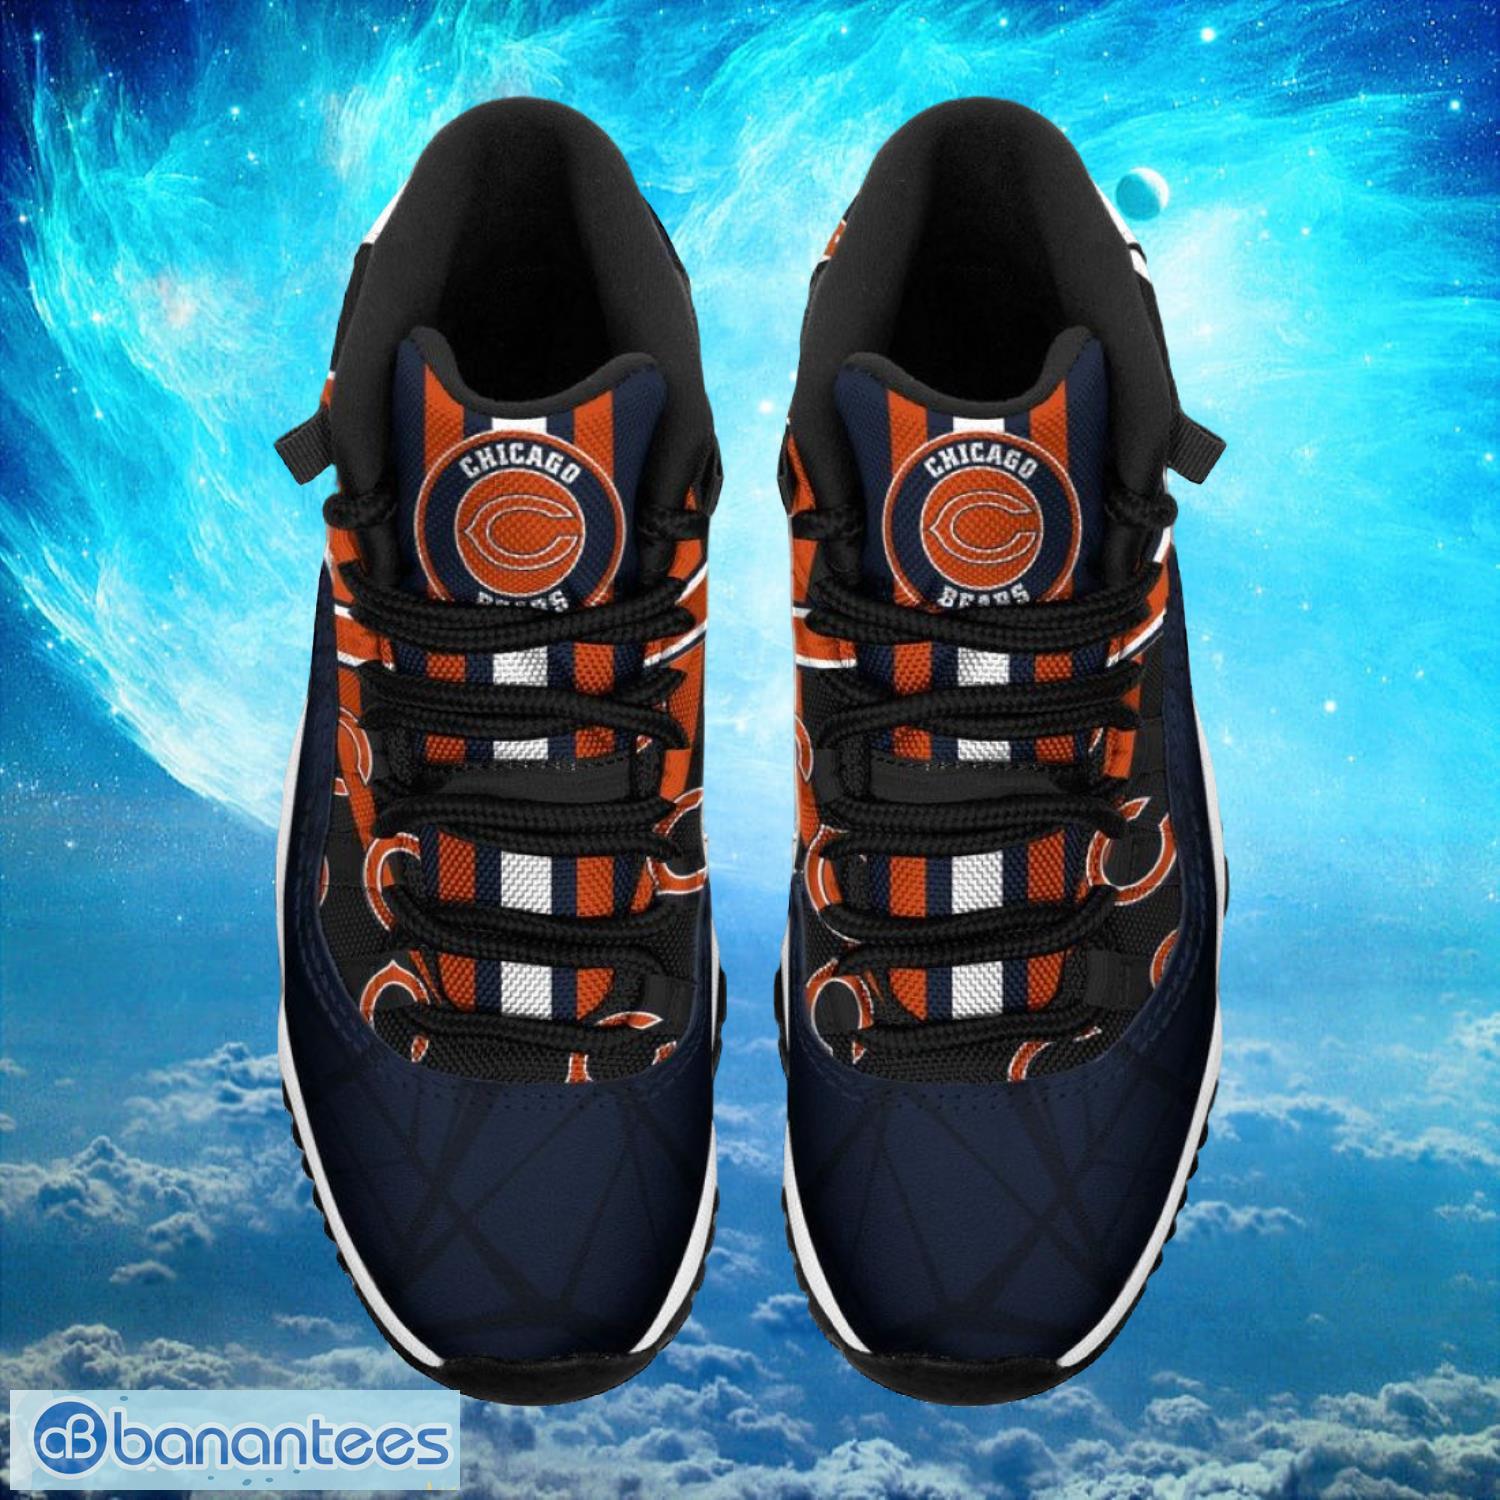 Chicago Bears NFL Air Jordan 11 Sneakers Shoes Gift For Fans Product Photo 2